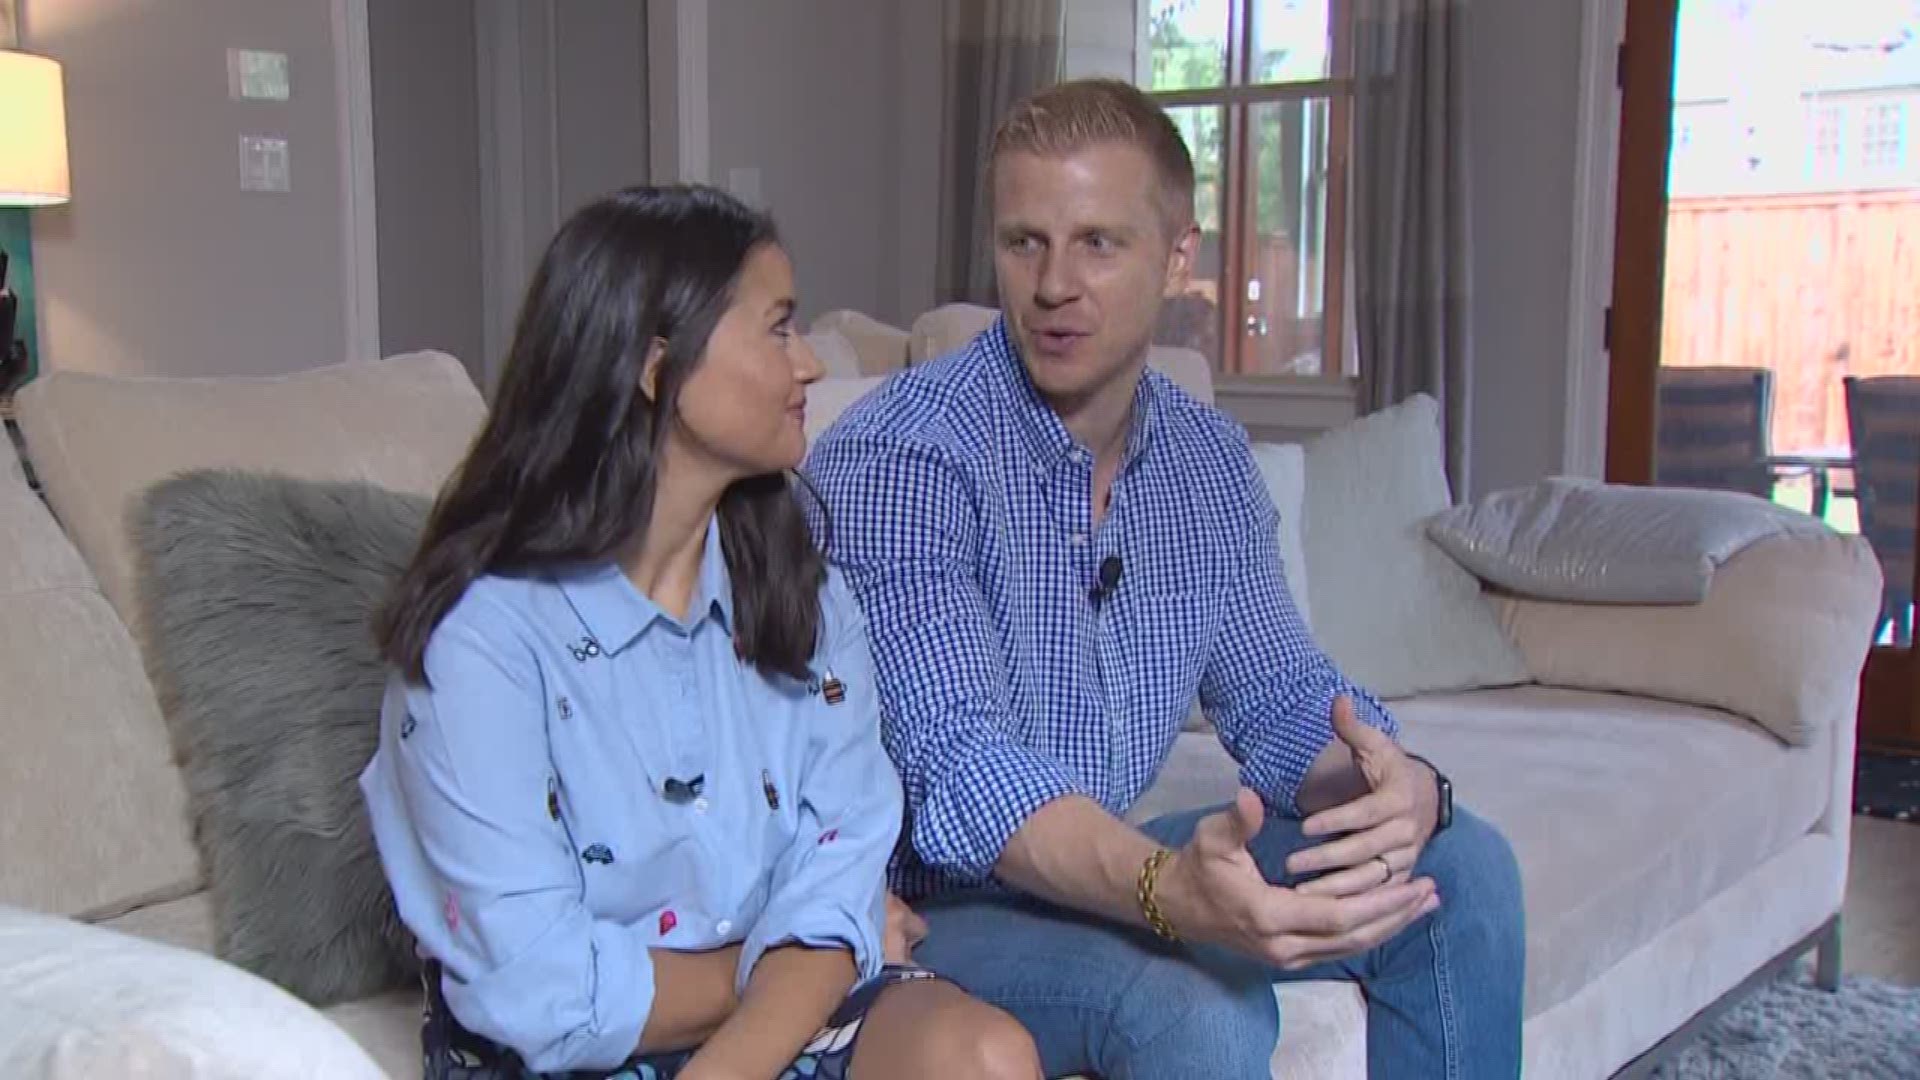 Looking for love? Dallas 'Bachelor' couple hopes to help through a new app